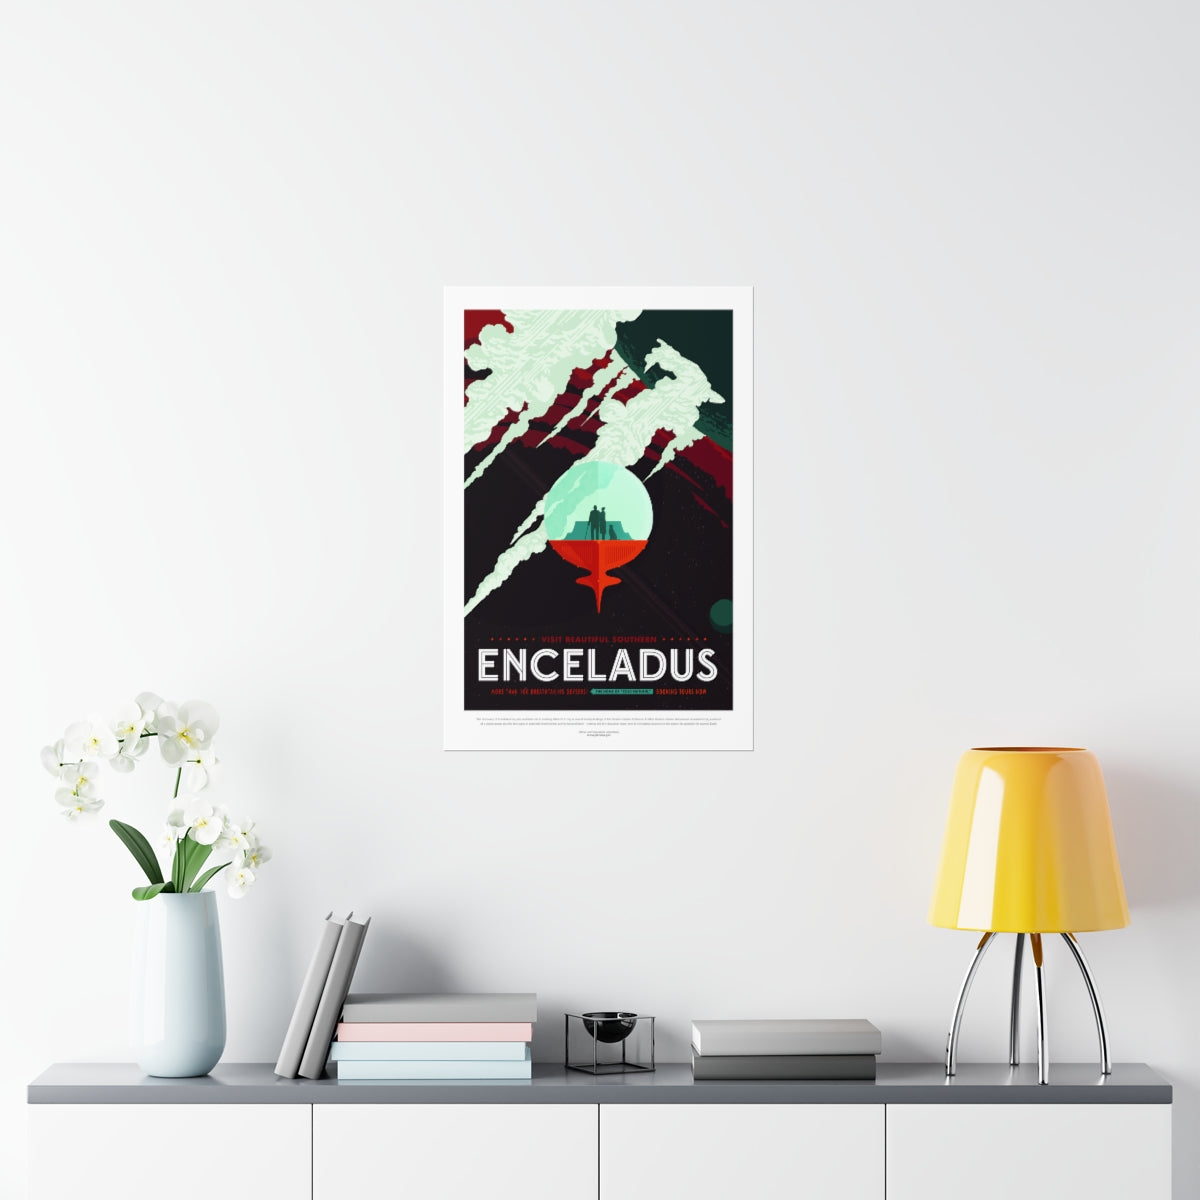 NASA - Visions of the Future : Enceladus Poster